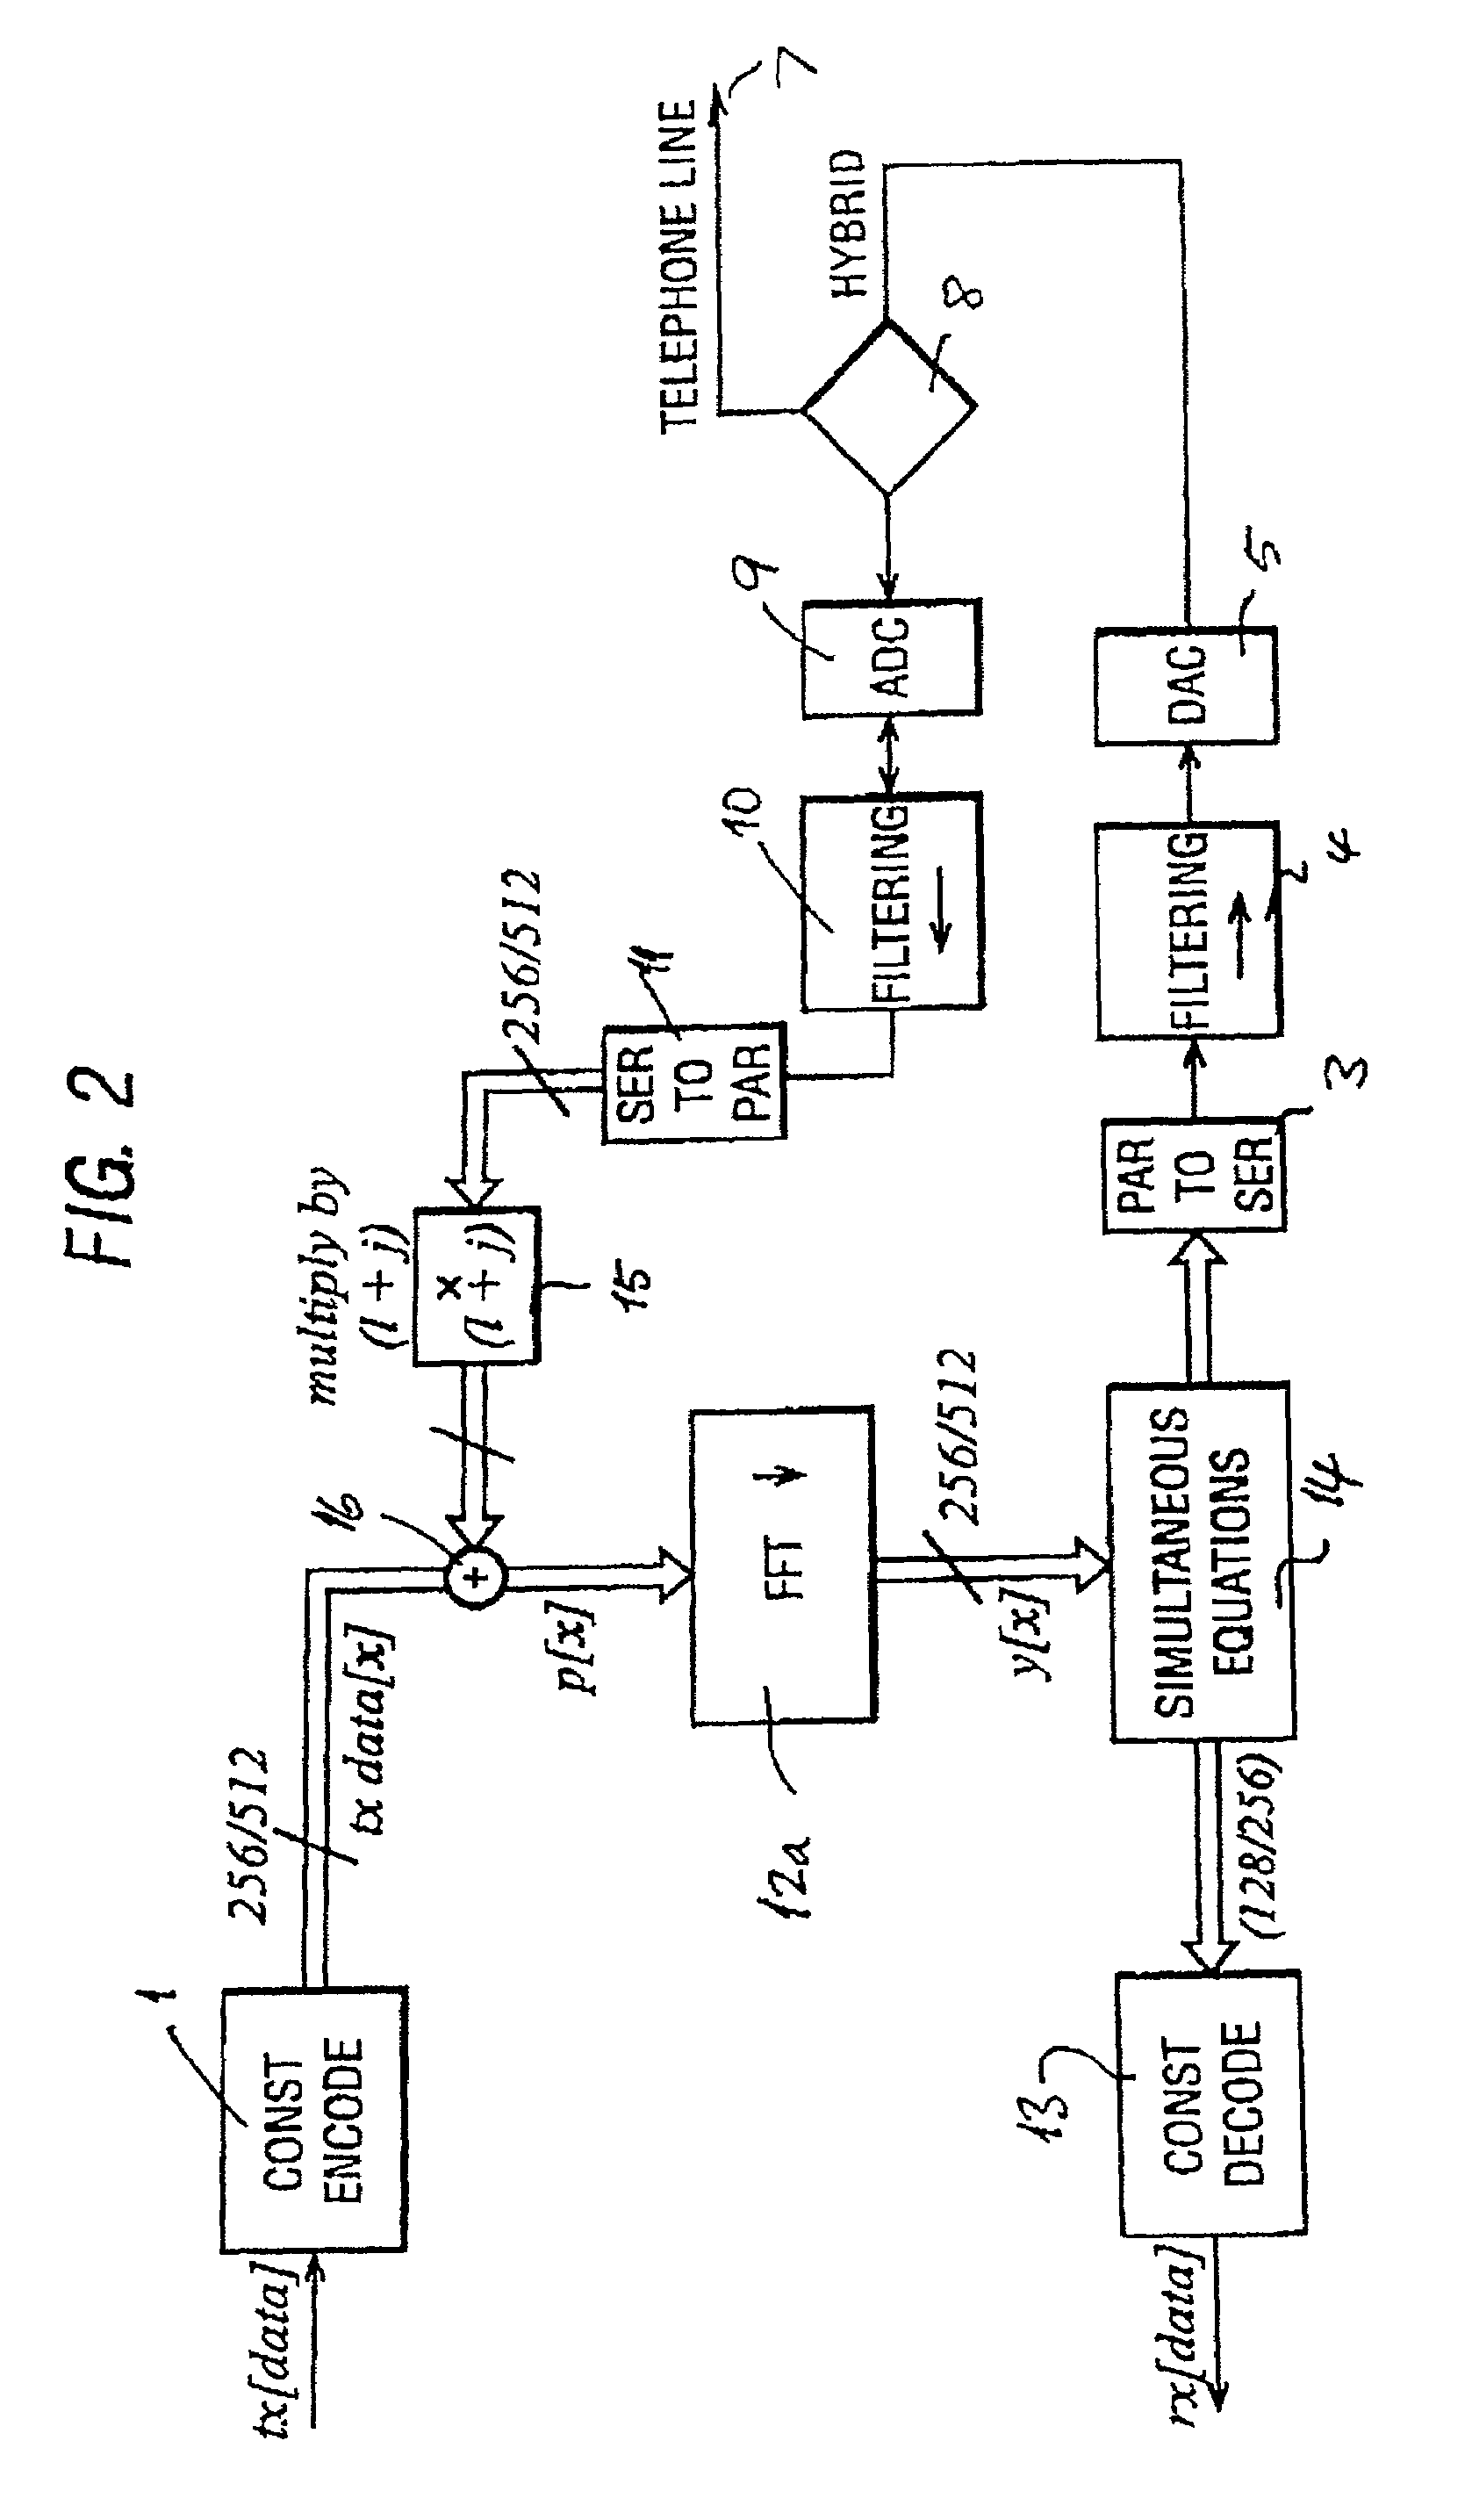 Reduced complexity DMT/OFDM transceiver